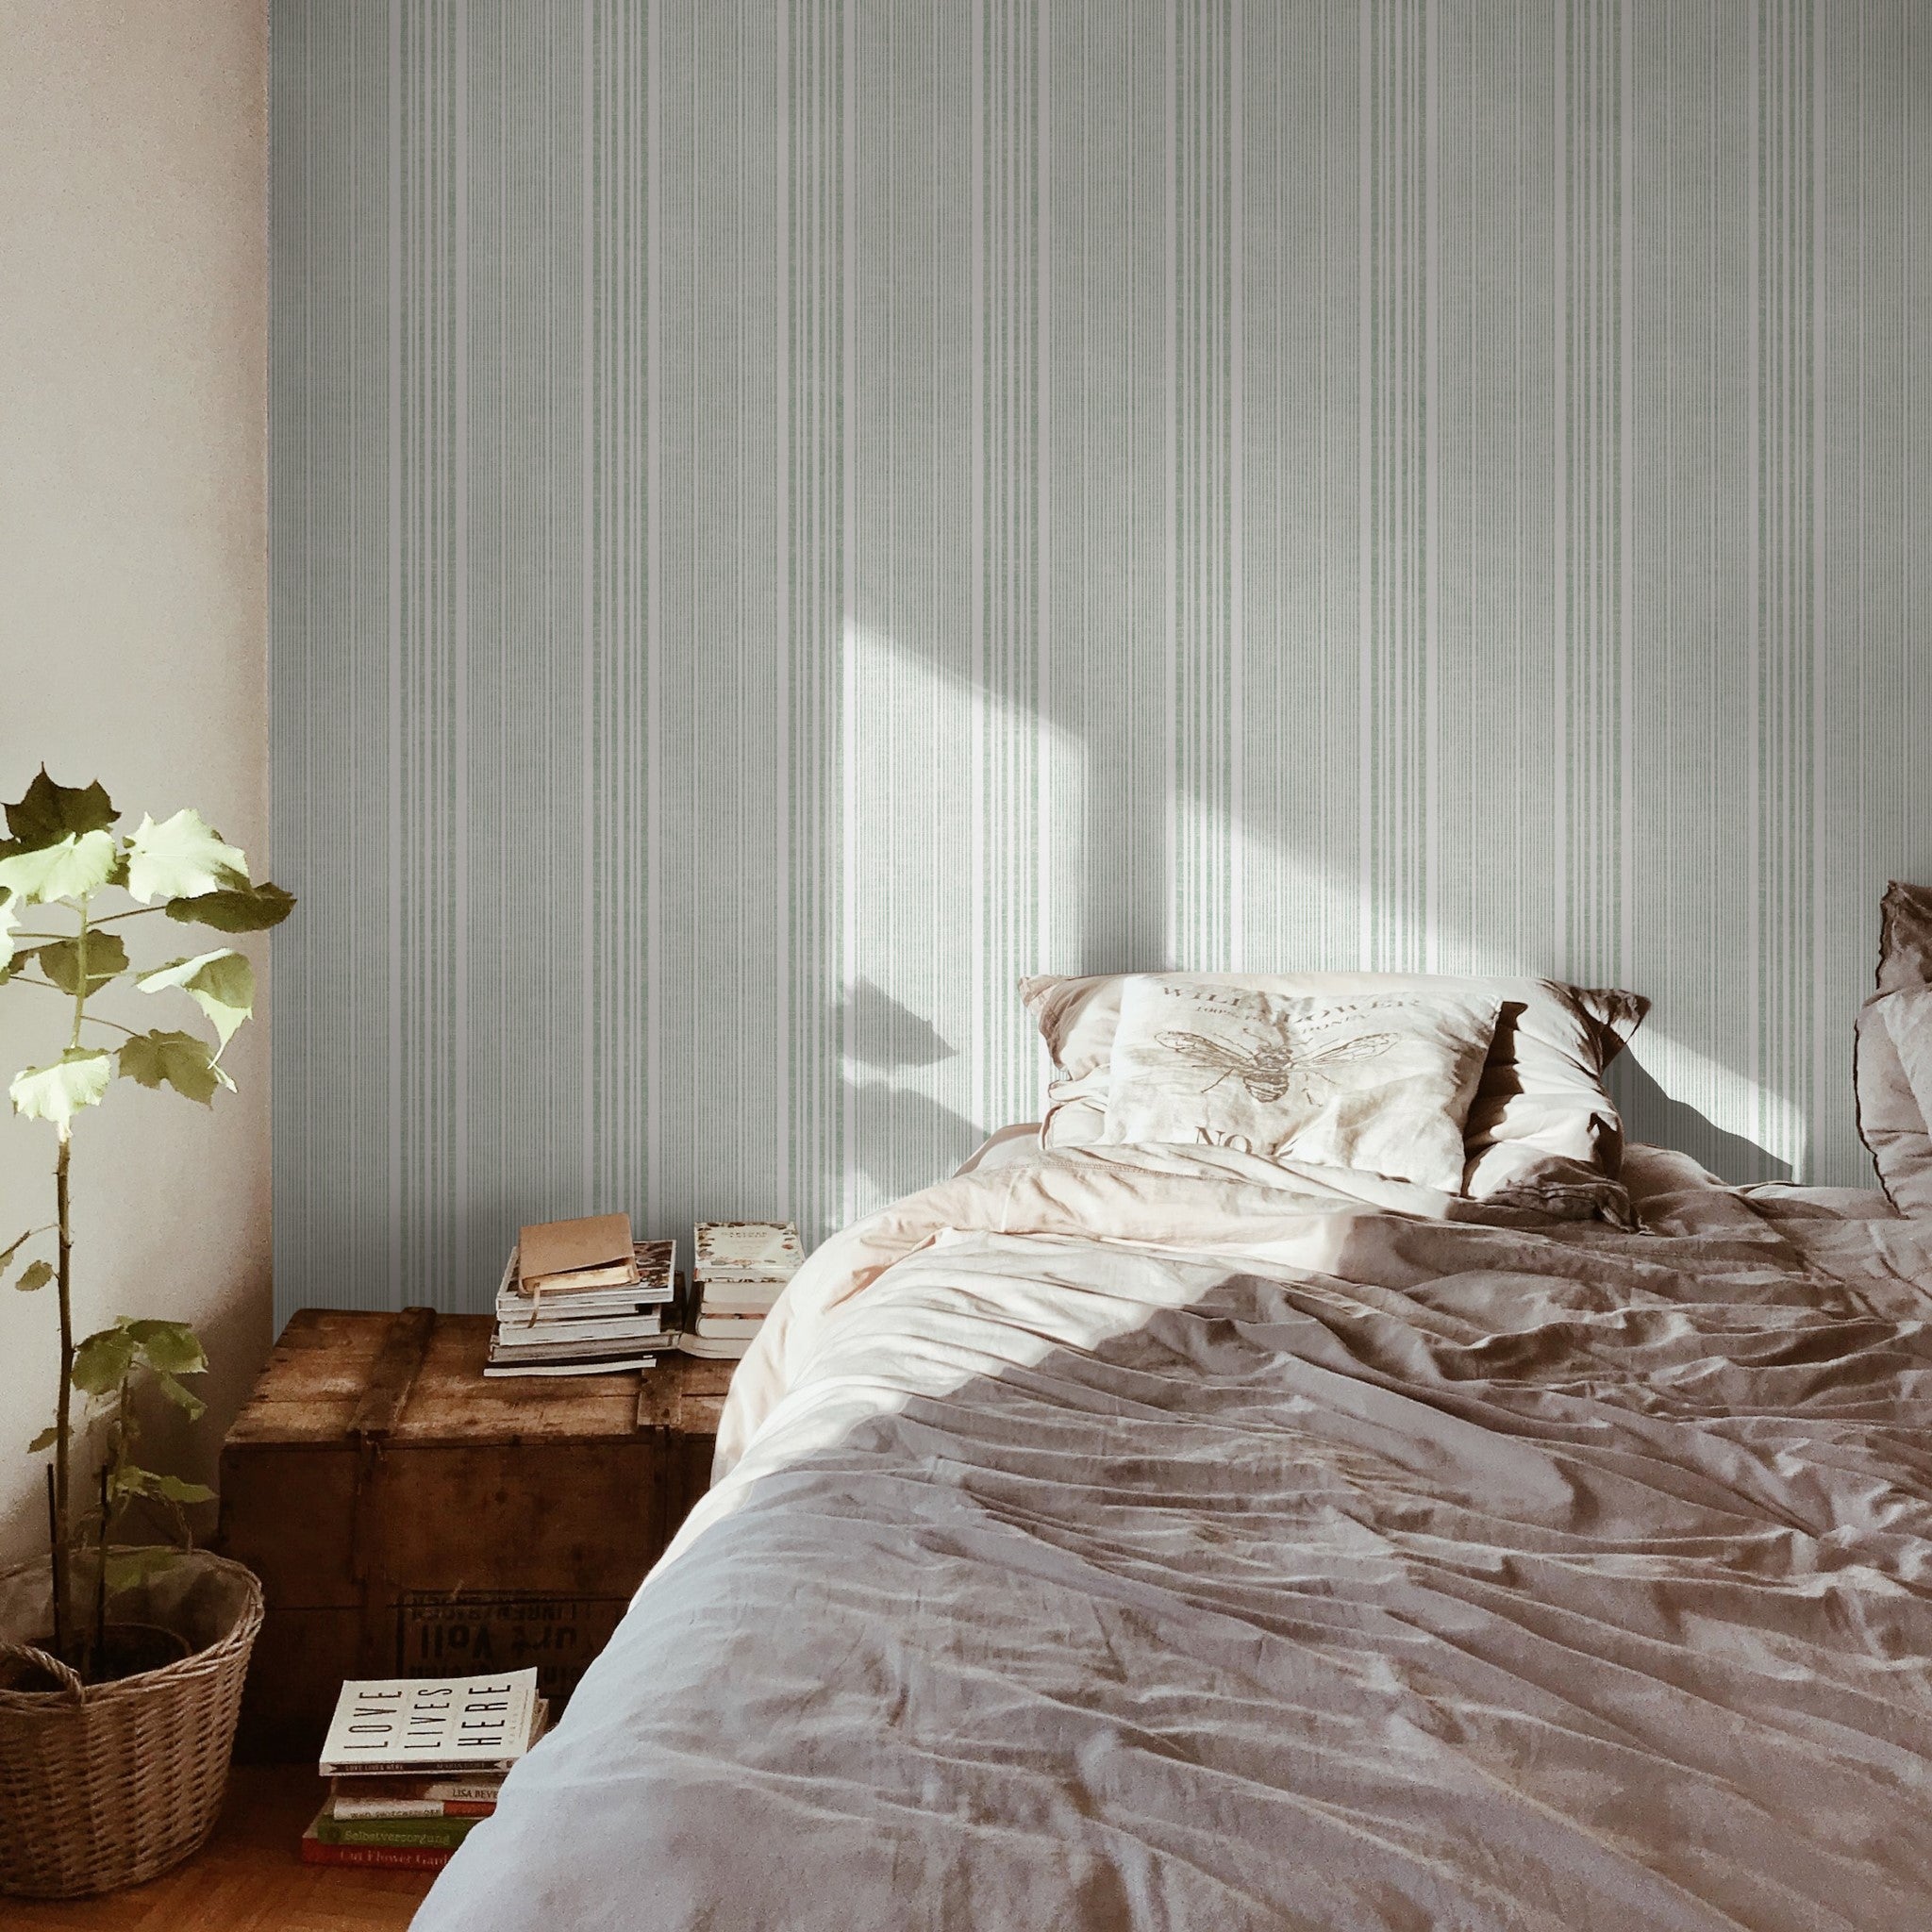 "Small Town Wallpaper by Wall Blush in cozy bedroom, highlighting elegant stripes and soft light."